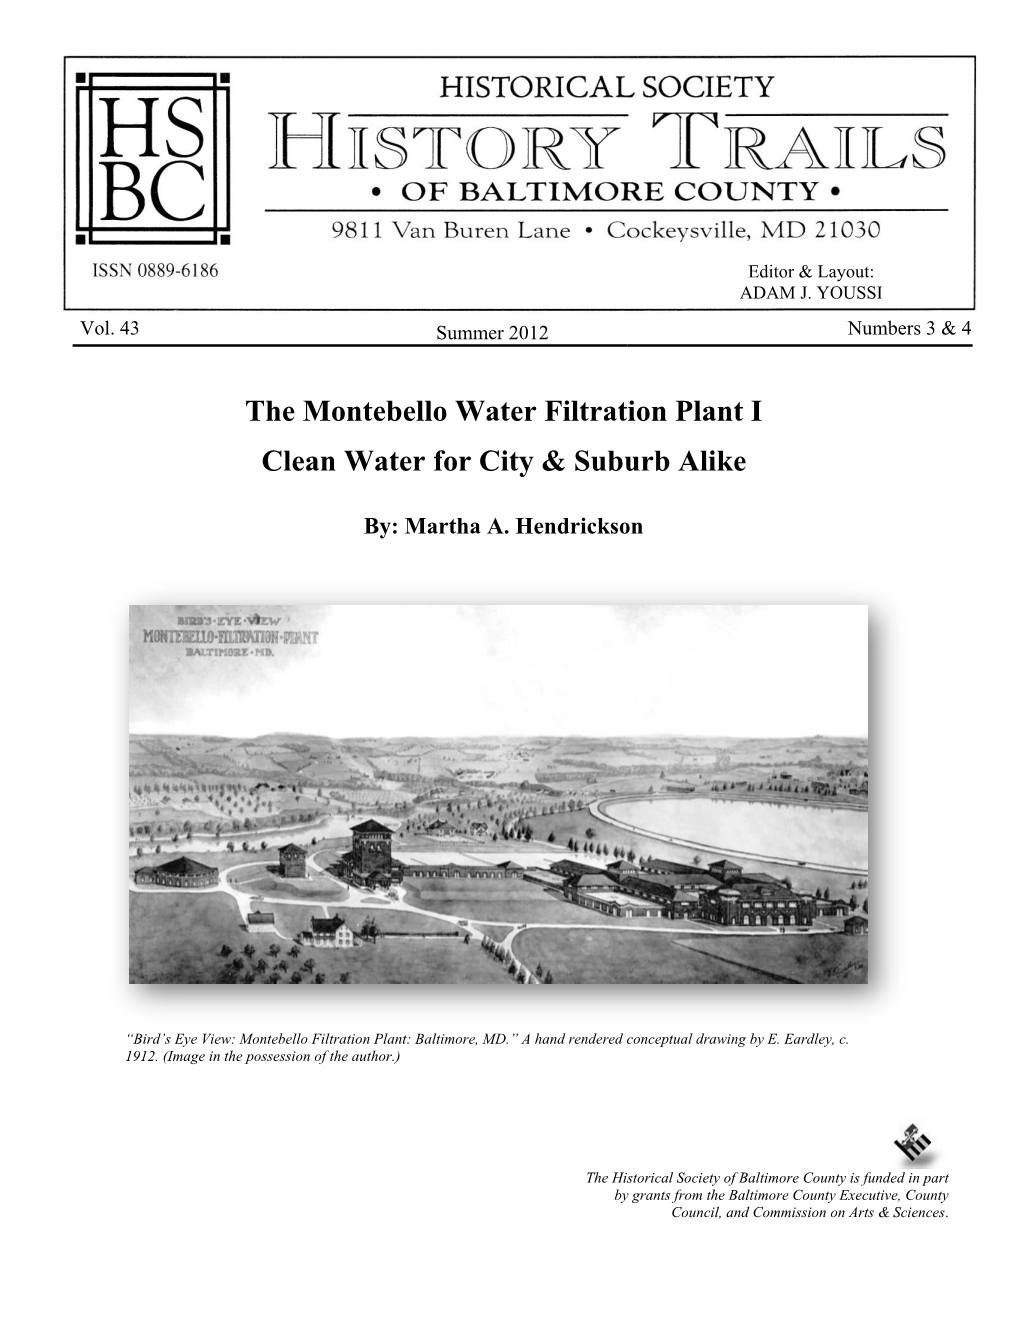 The Montebello Water Filtration Plant I Clean Water for City & Suburb Alike